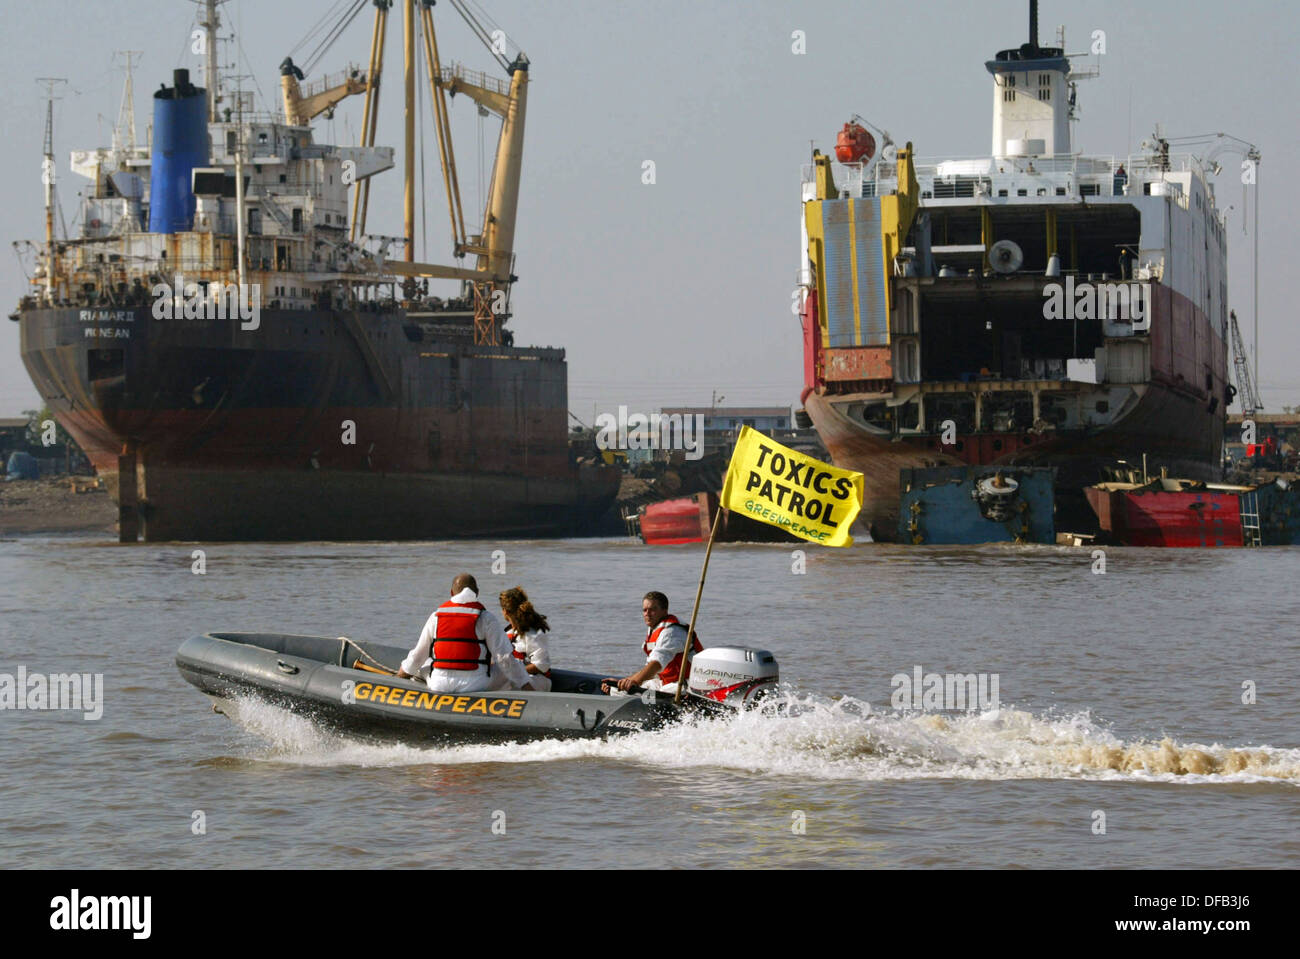 Greenpeace activists protest in front of two illegal ships from United Kingdom which are thought to have toxic substances onboar Stock Photo